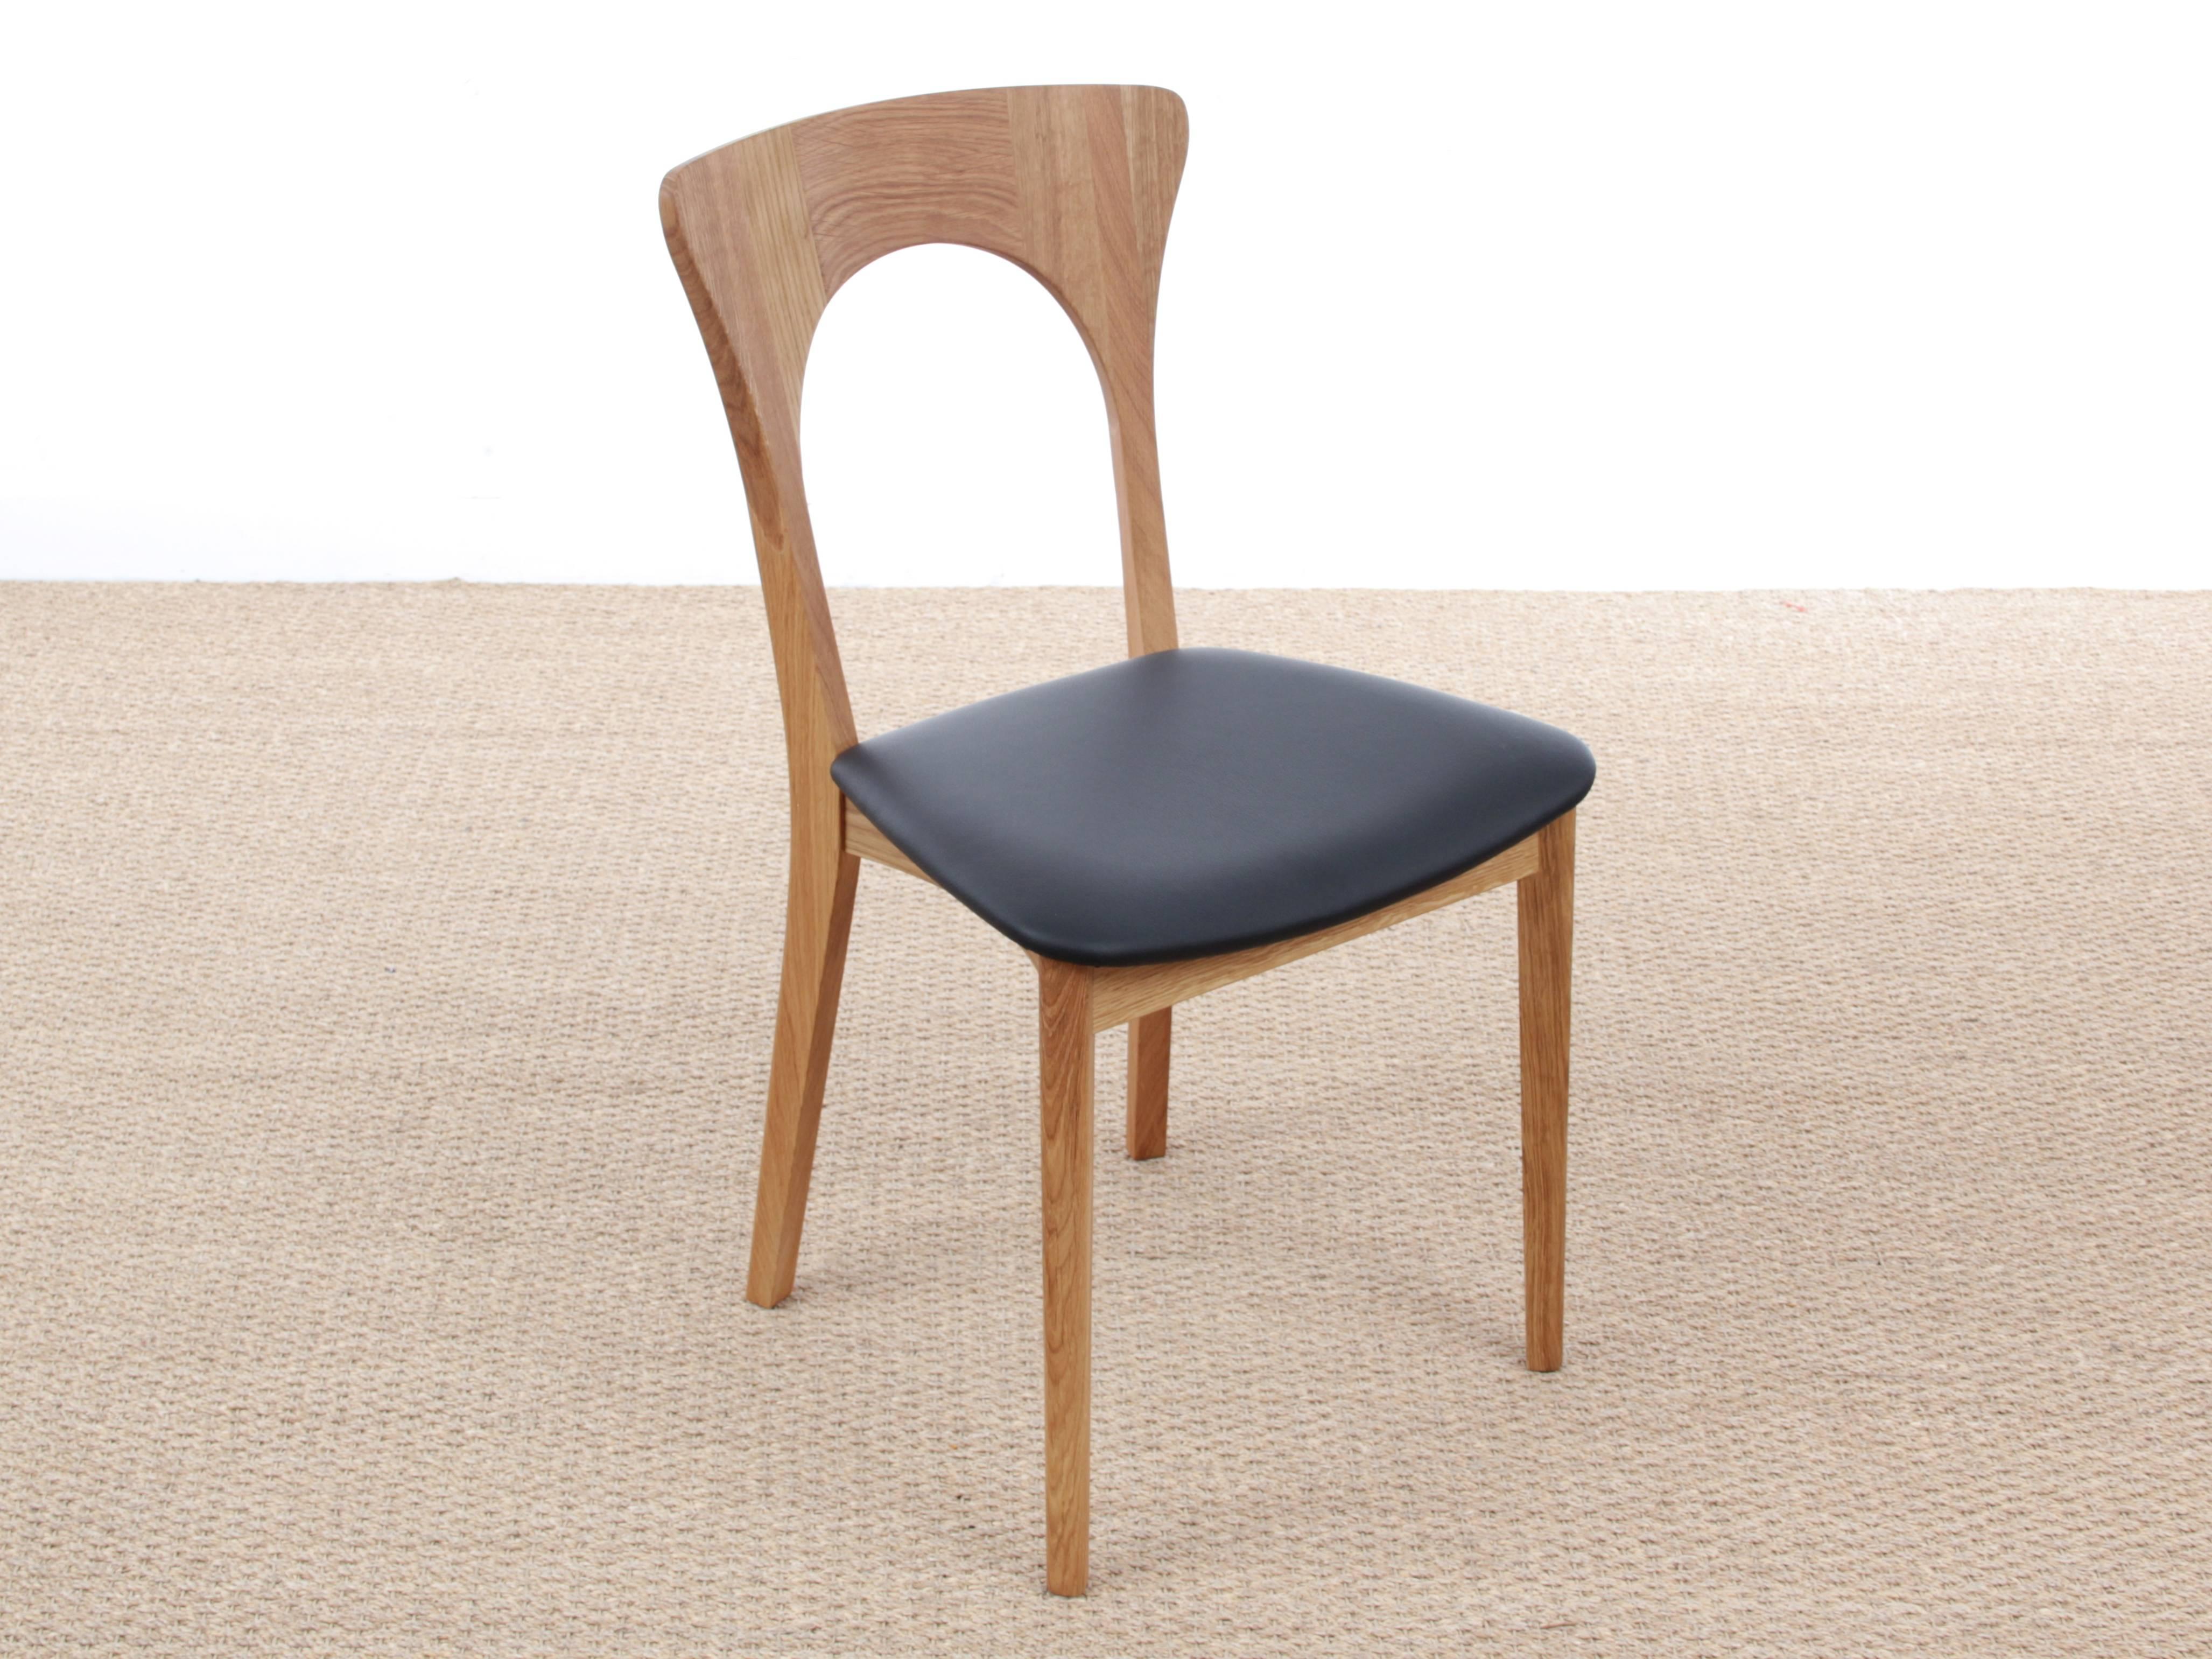 Wood Scandinavian Dining Chair Model Peter by Niels Koefoed, New Edition For Sale